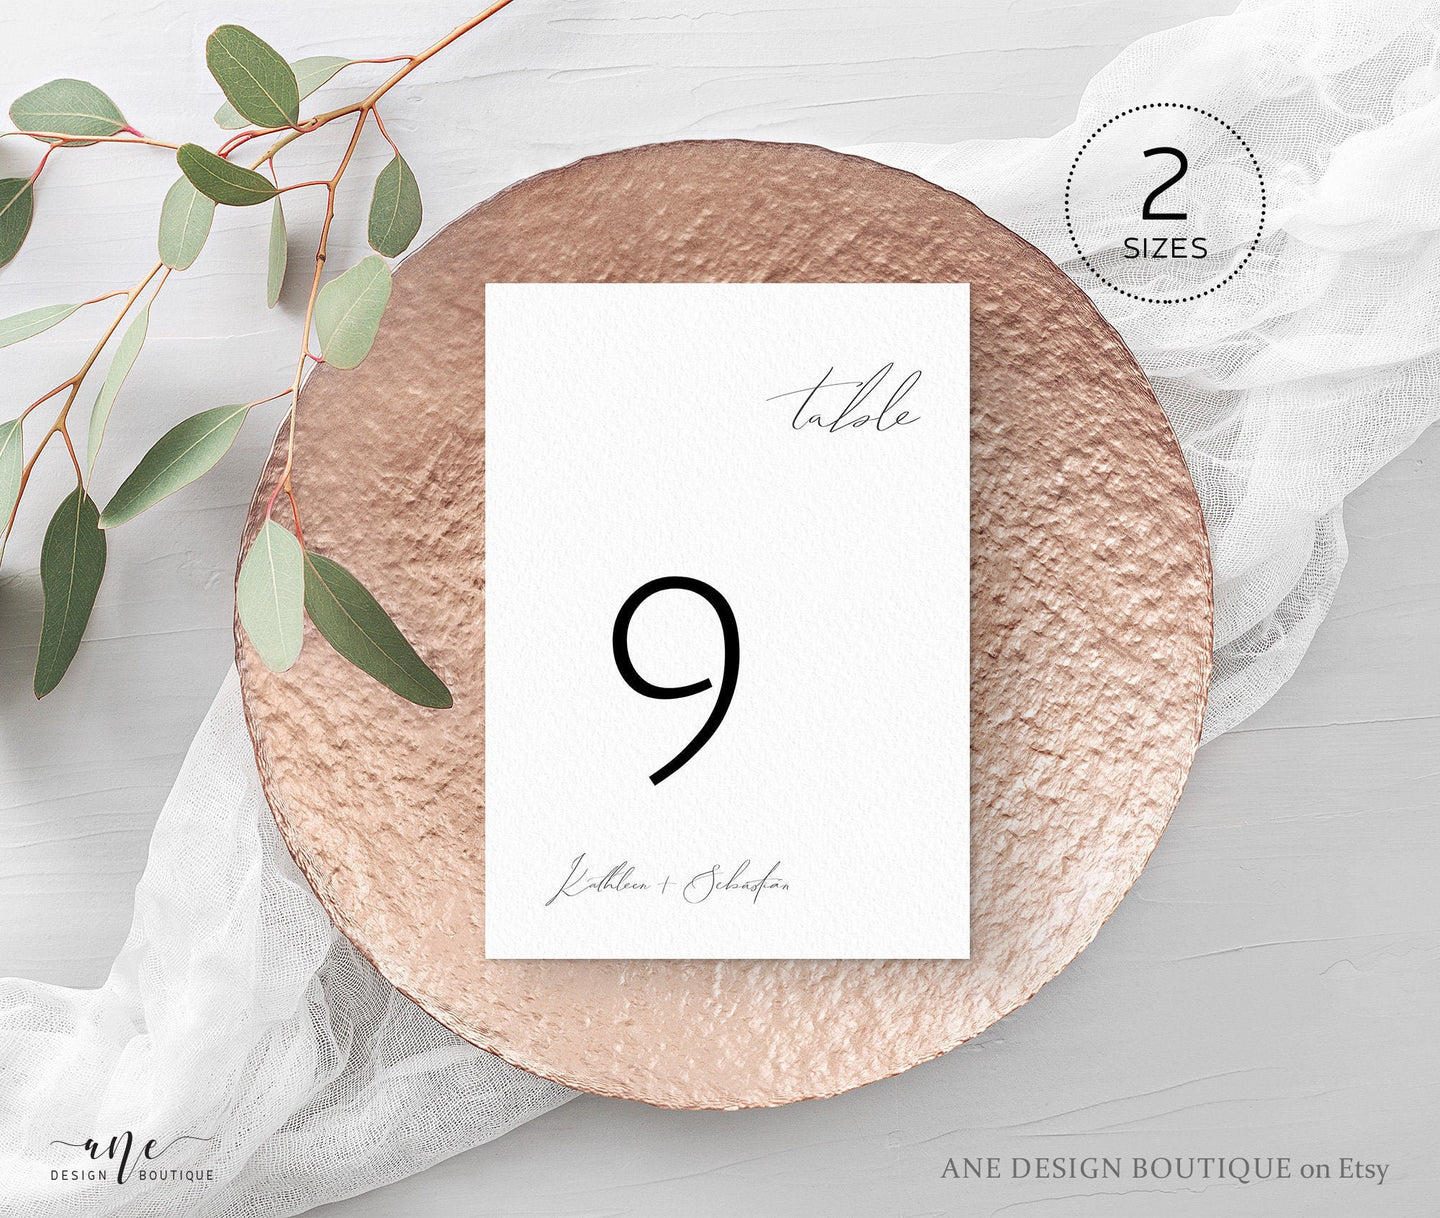 Minimalist Table Number Cards Template, Simple Modern Calligraphy Wedding Bridal Table Card 4x6 5x7, 100% Editable, Printable, Download 011